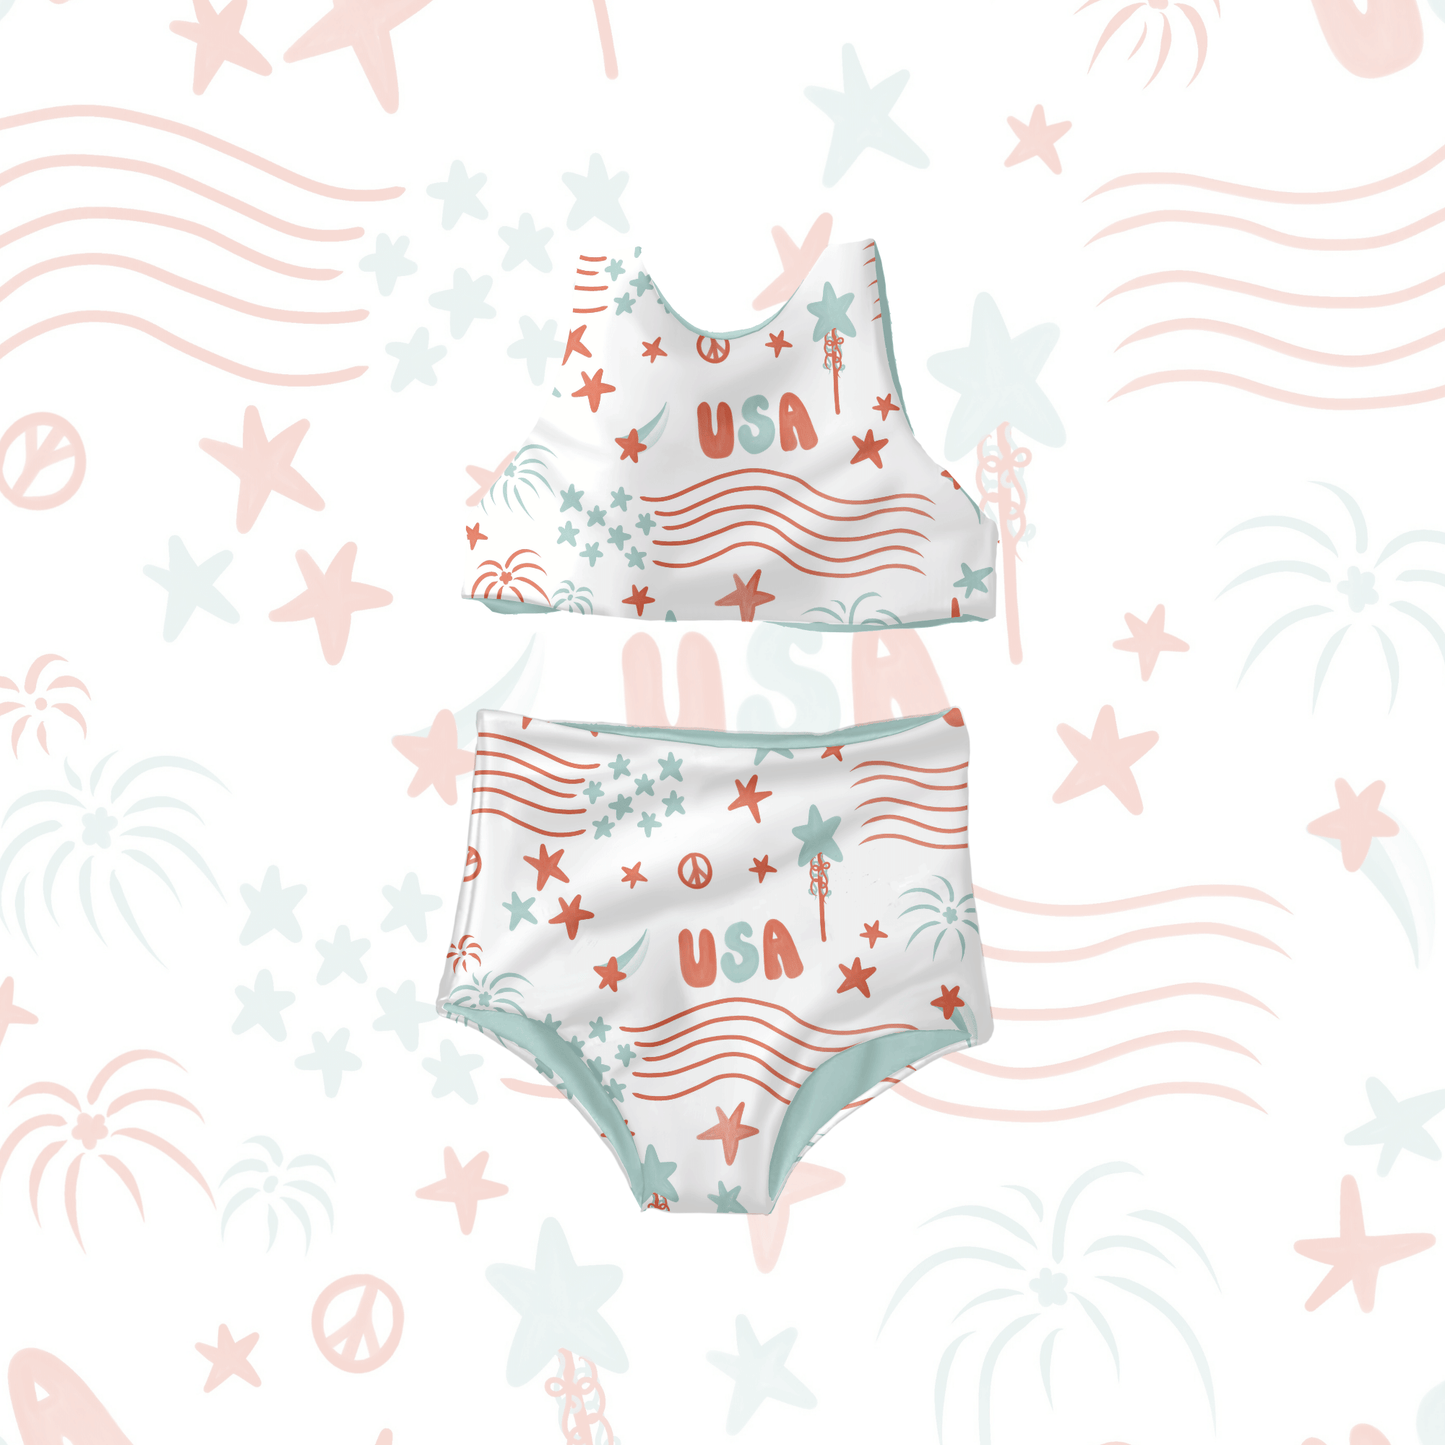 Boho Fourth of July Flags Pattern